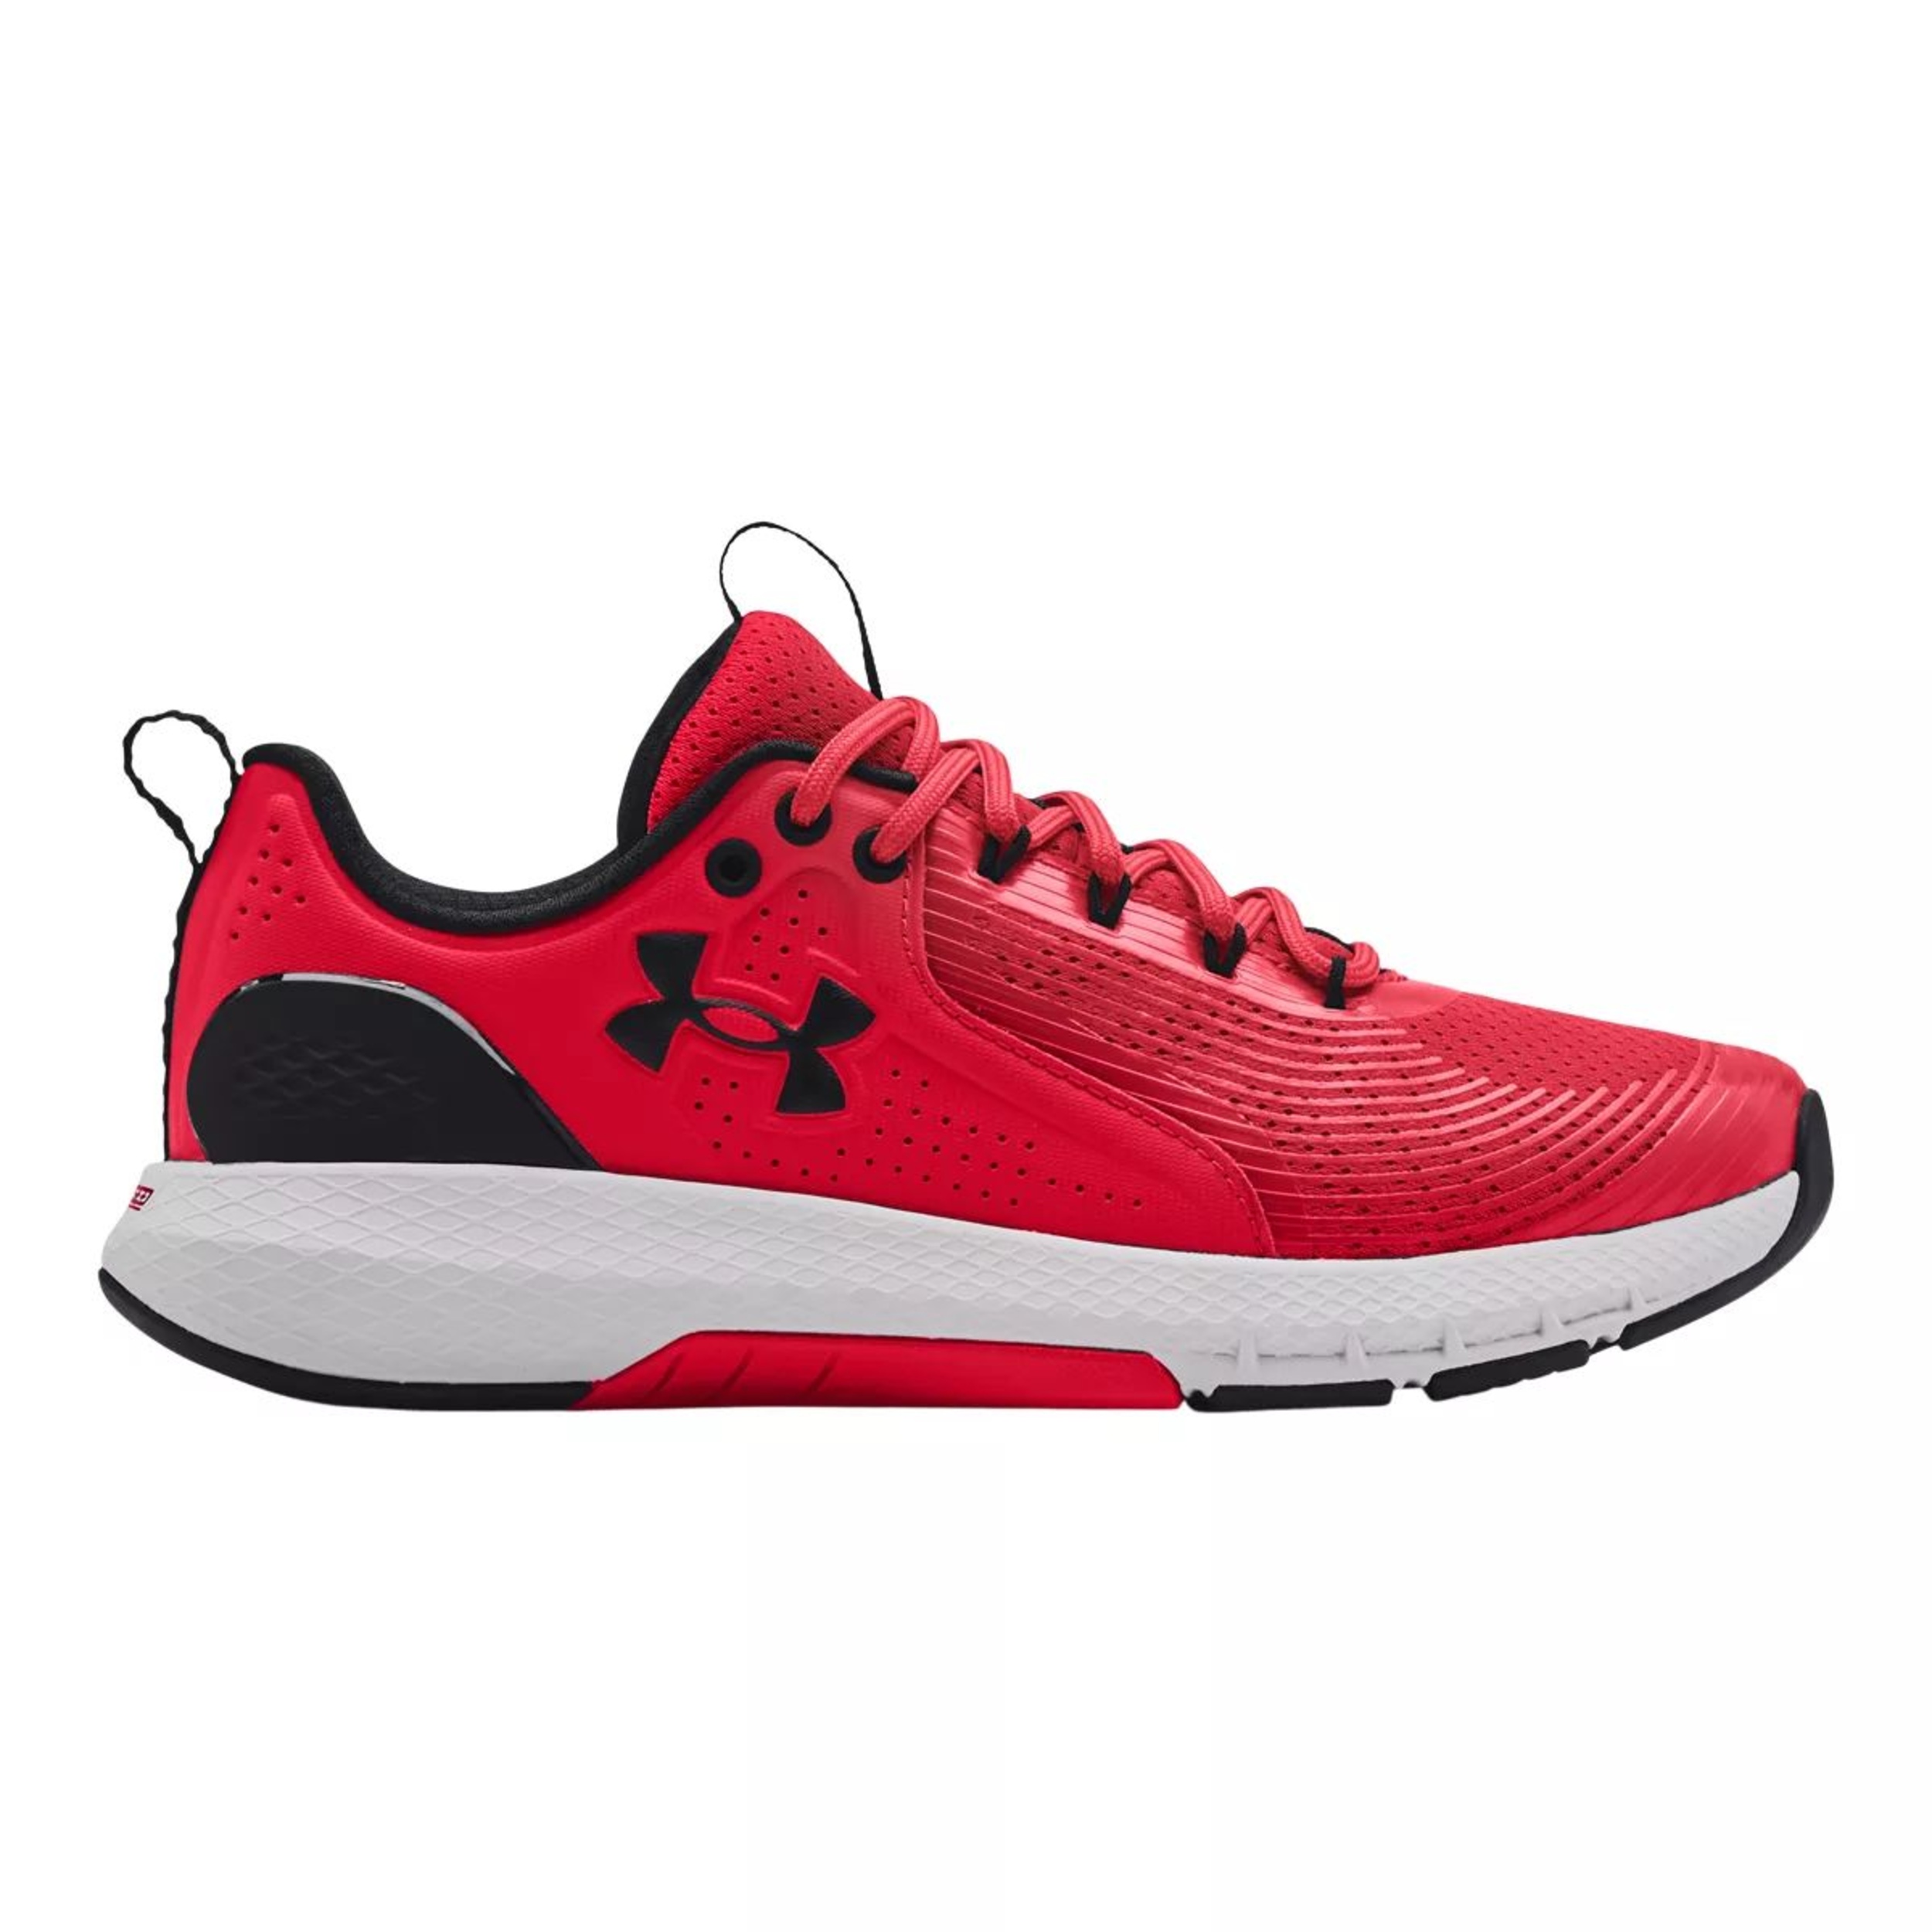 Under Armour Men's Commit 3.0 Training Shoes, Gym, Cushioned, Leather ...